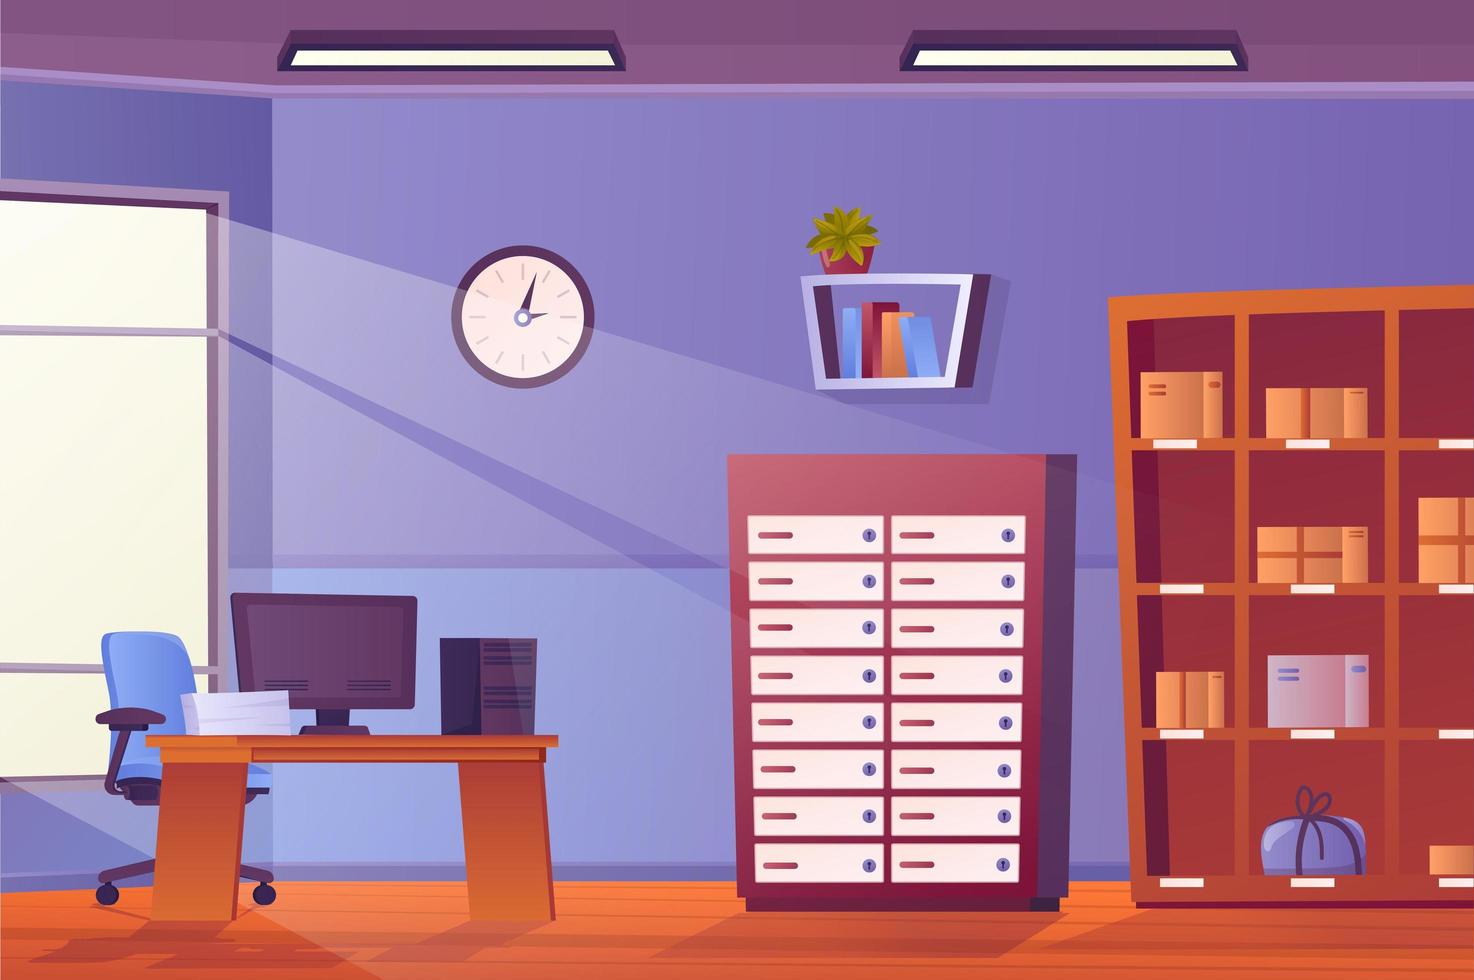 Workplace at office interior concept in flat cartoon design. Room and furniture wallpaper. Desktop computer, desk with papers, armchair, cabinet, rack, bookshelf, decor. Vector illustration background